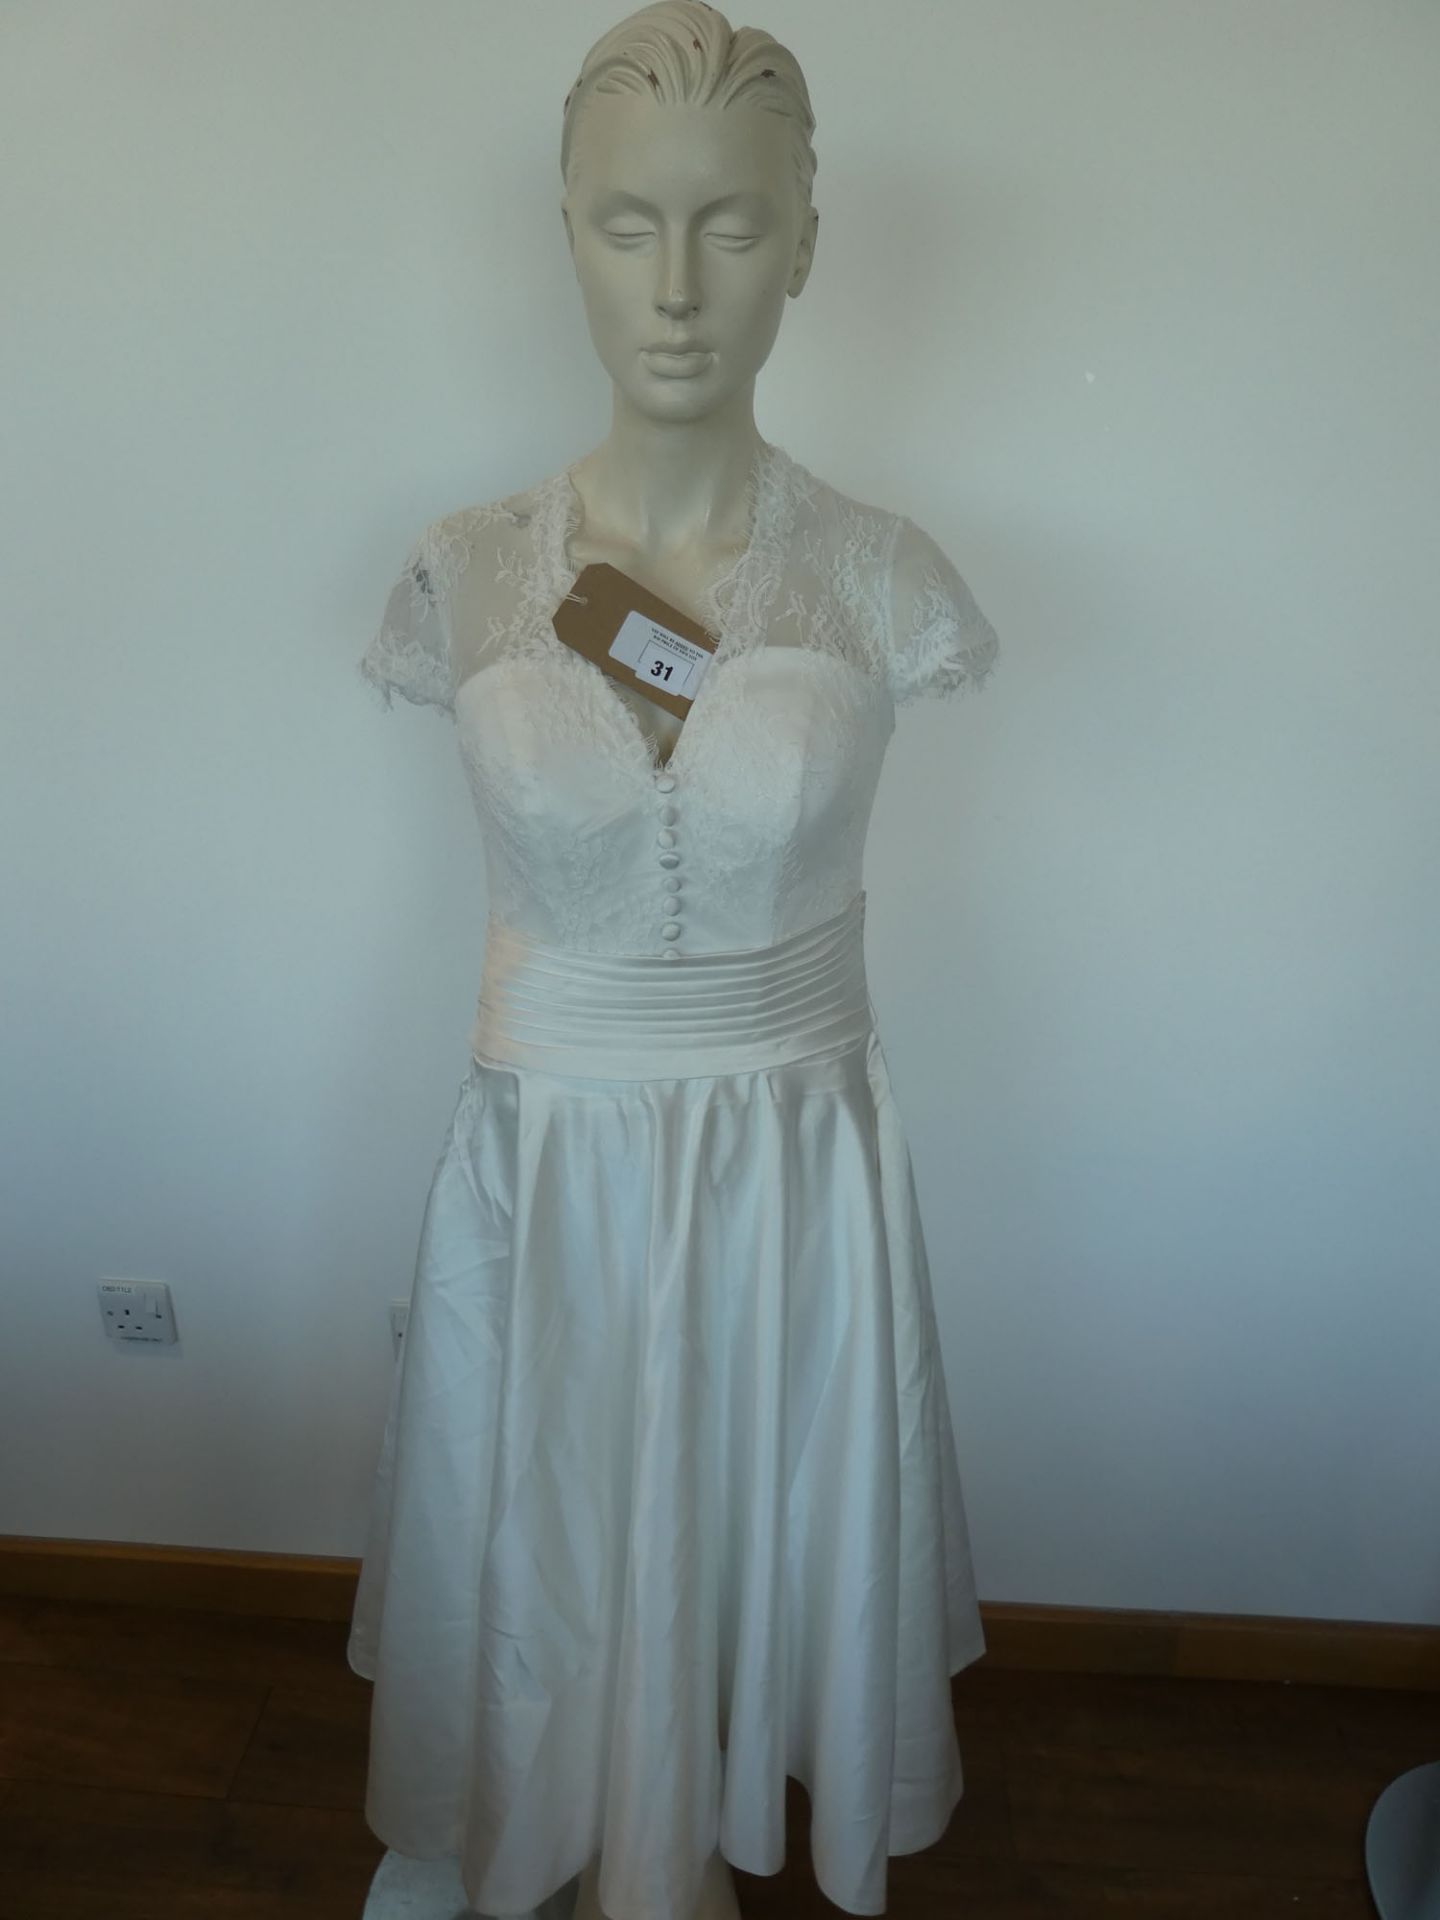 Ladies lace top wedding dress in white size S